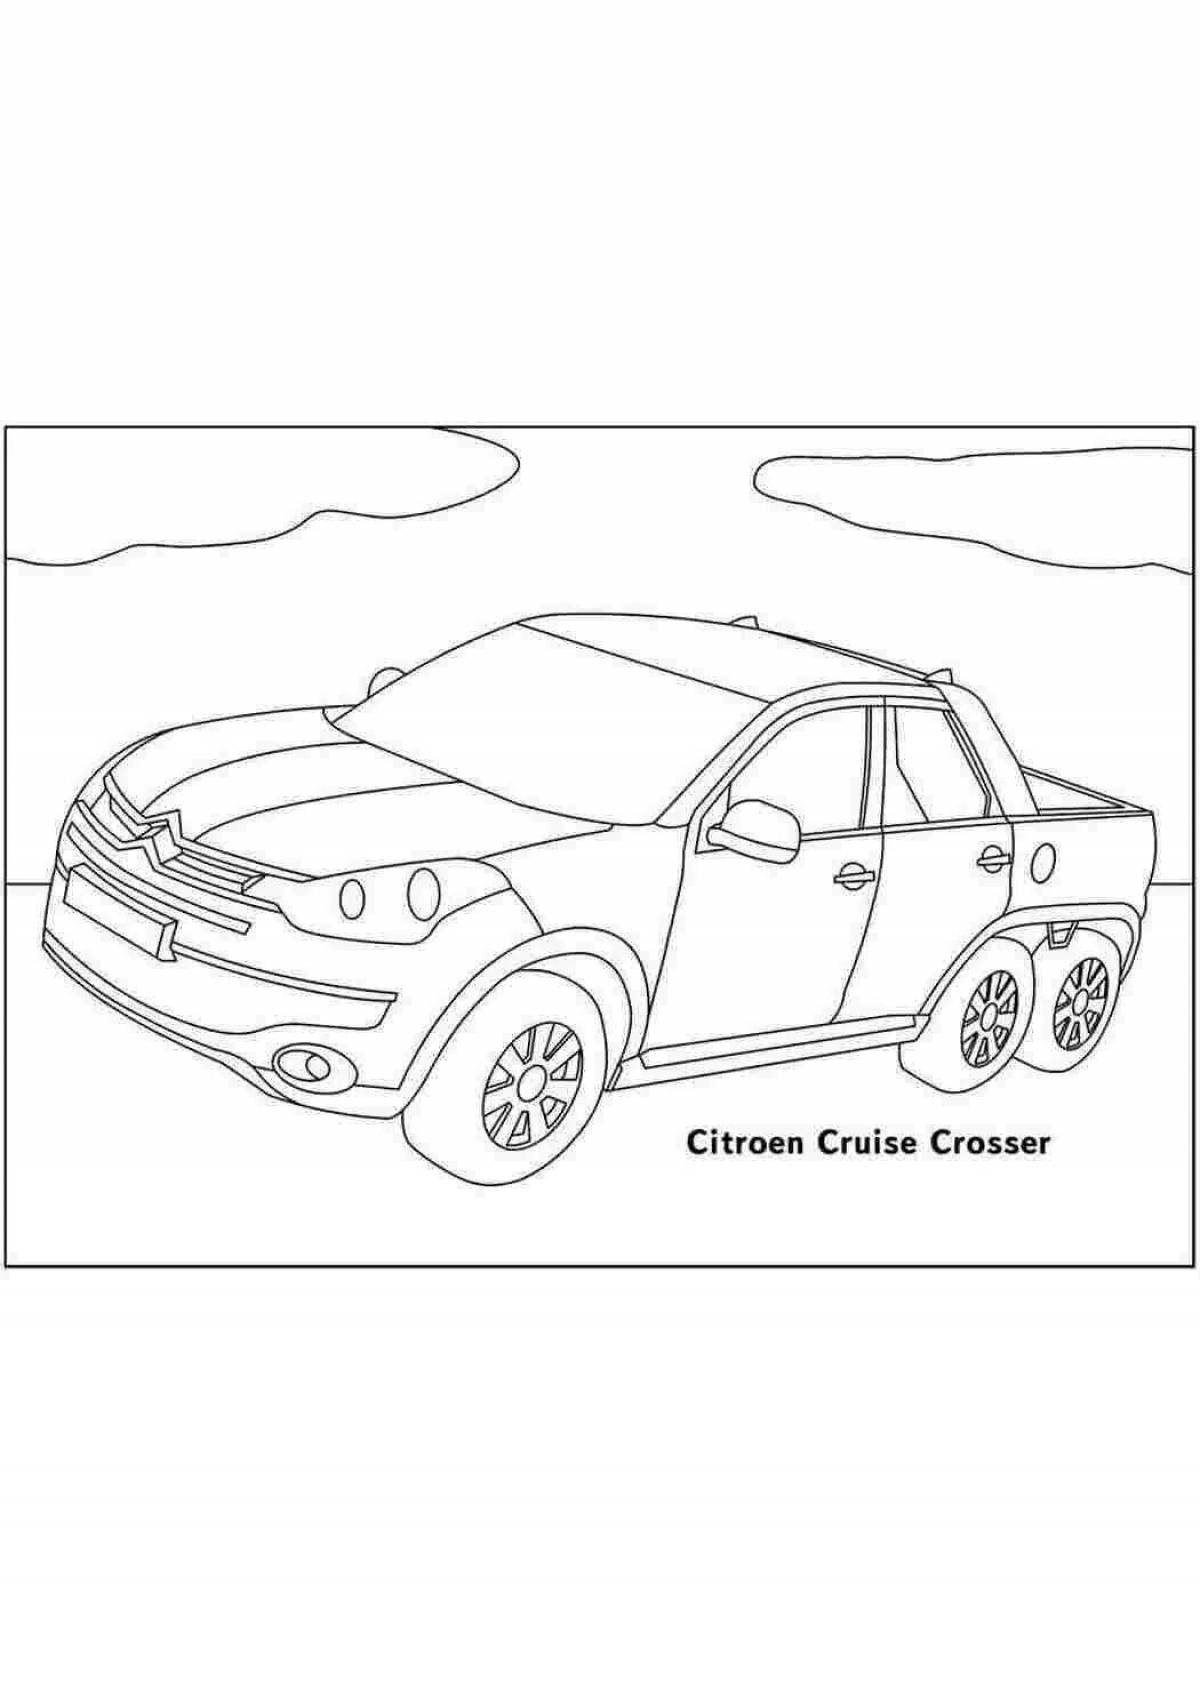 Playful car coloring by numbers